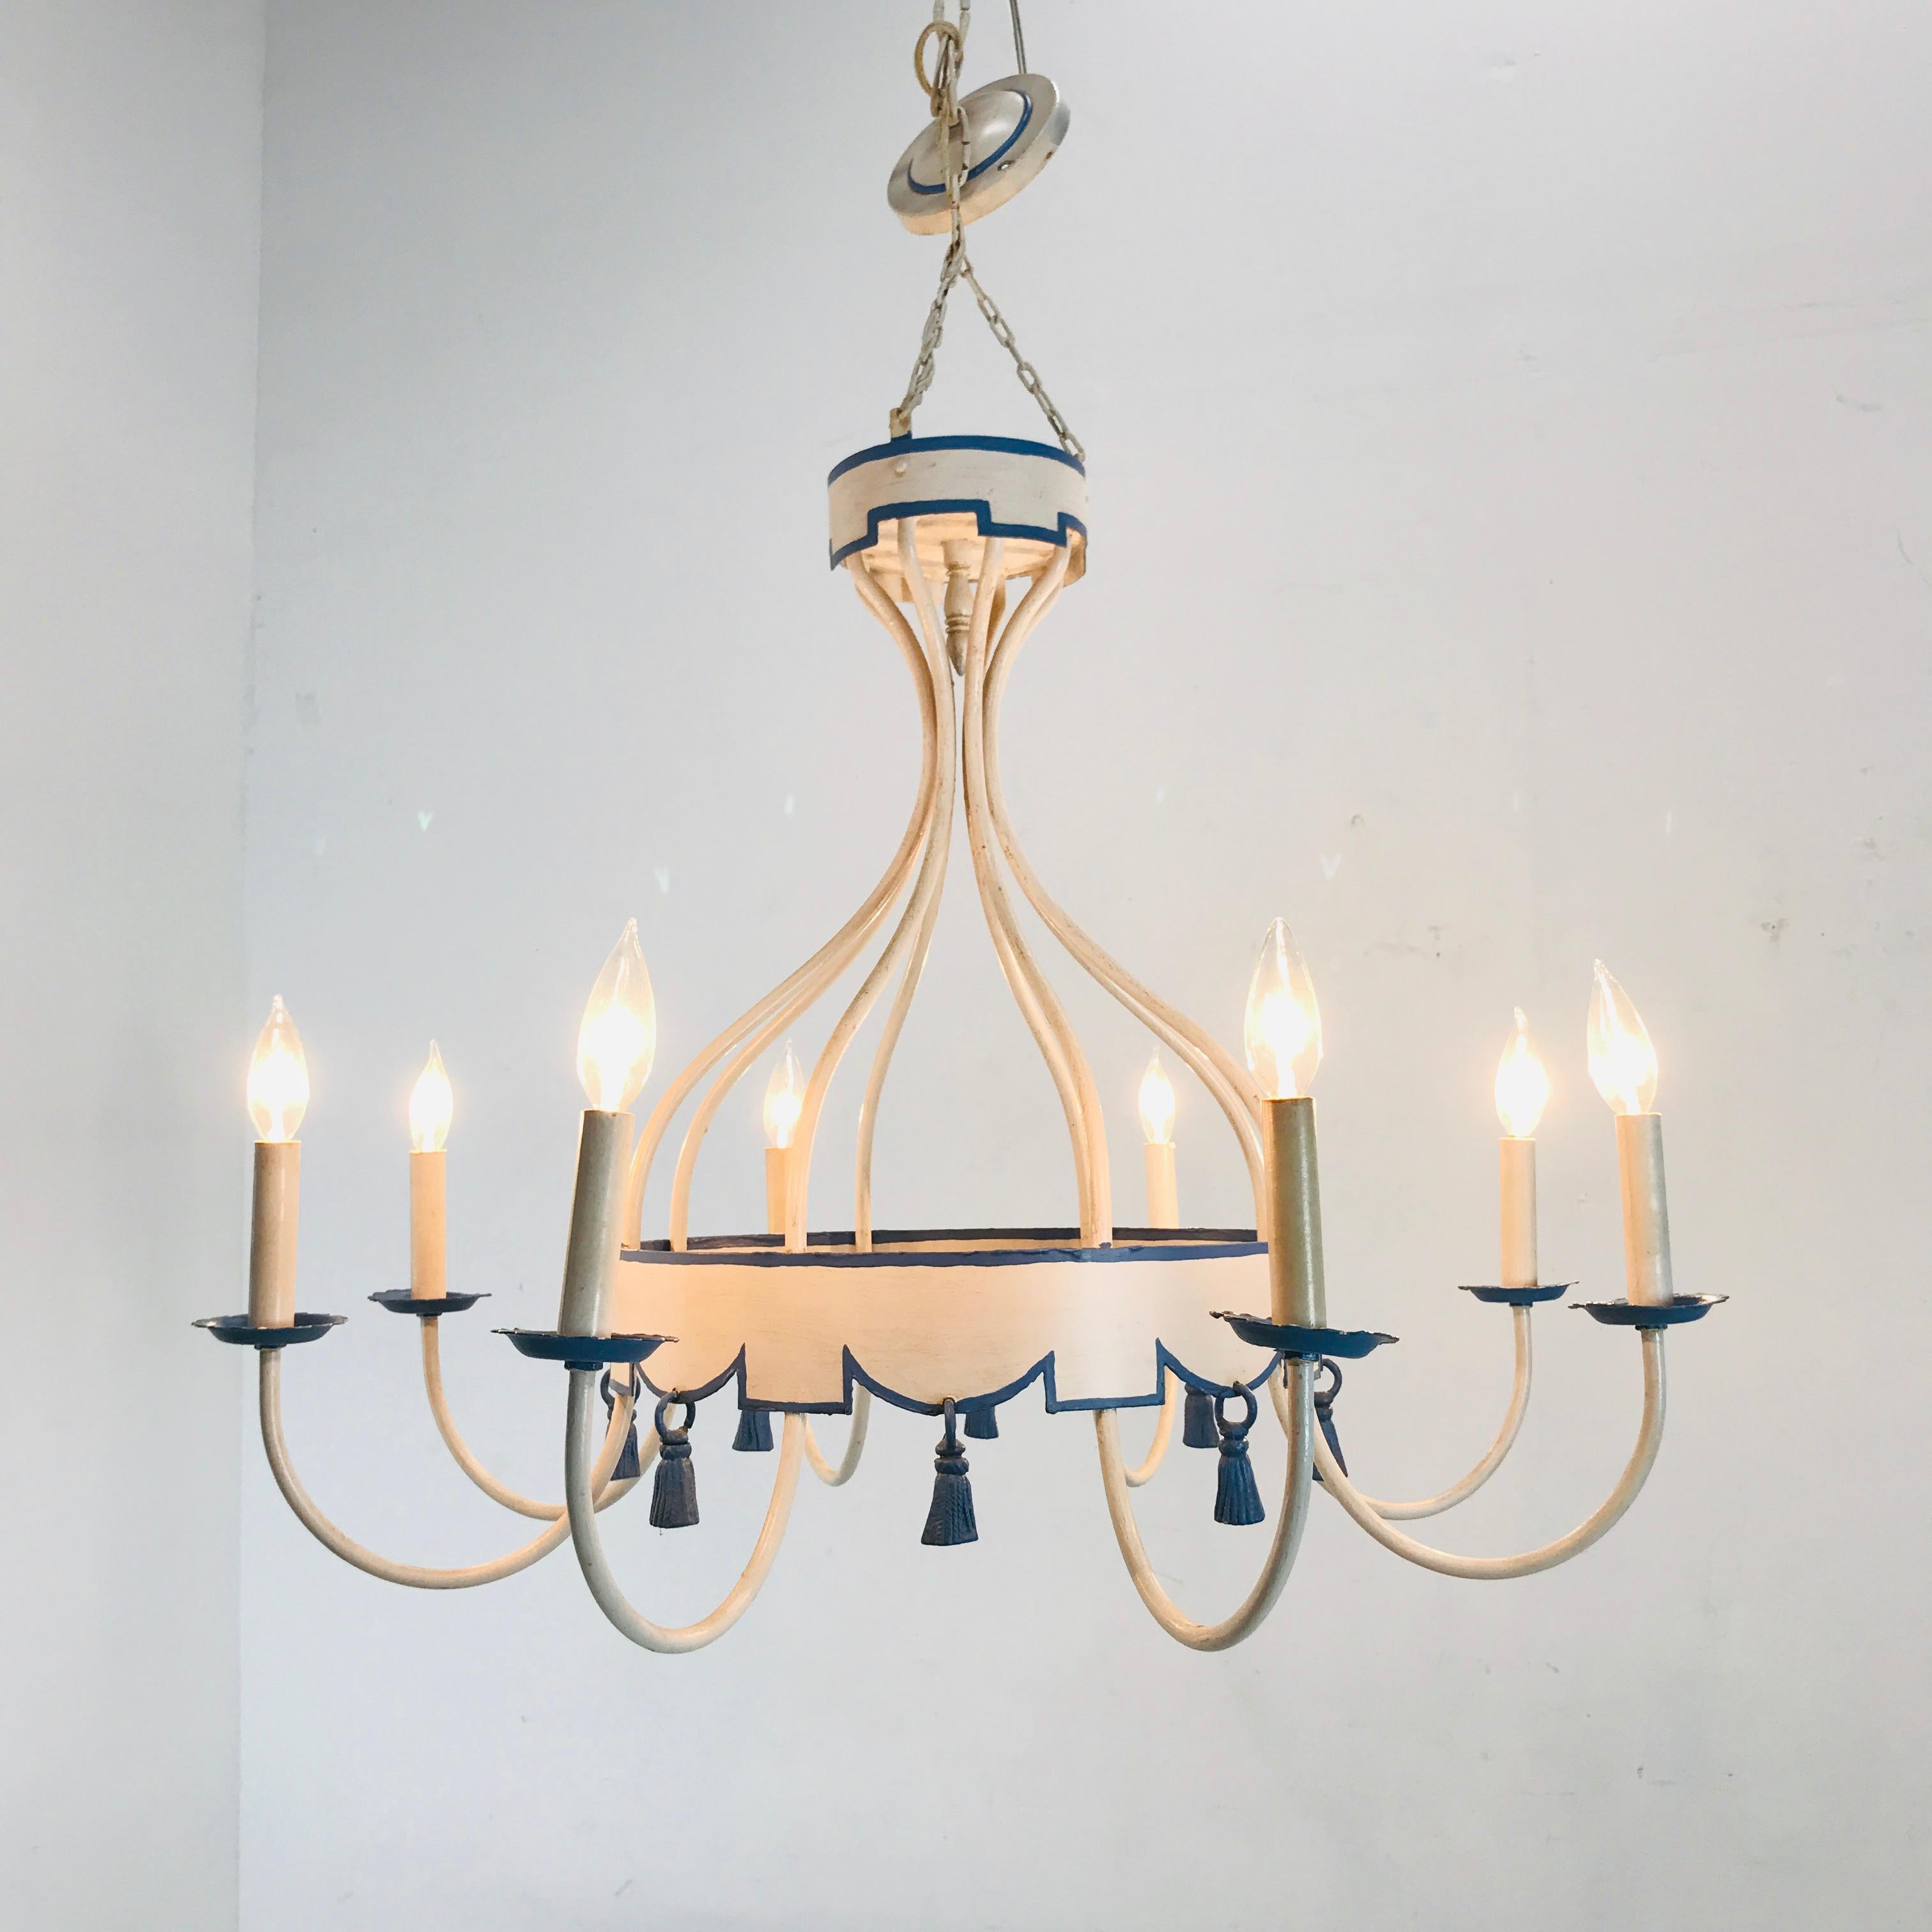 Painted Blue and White Italian Tole Tassel Chandelier